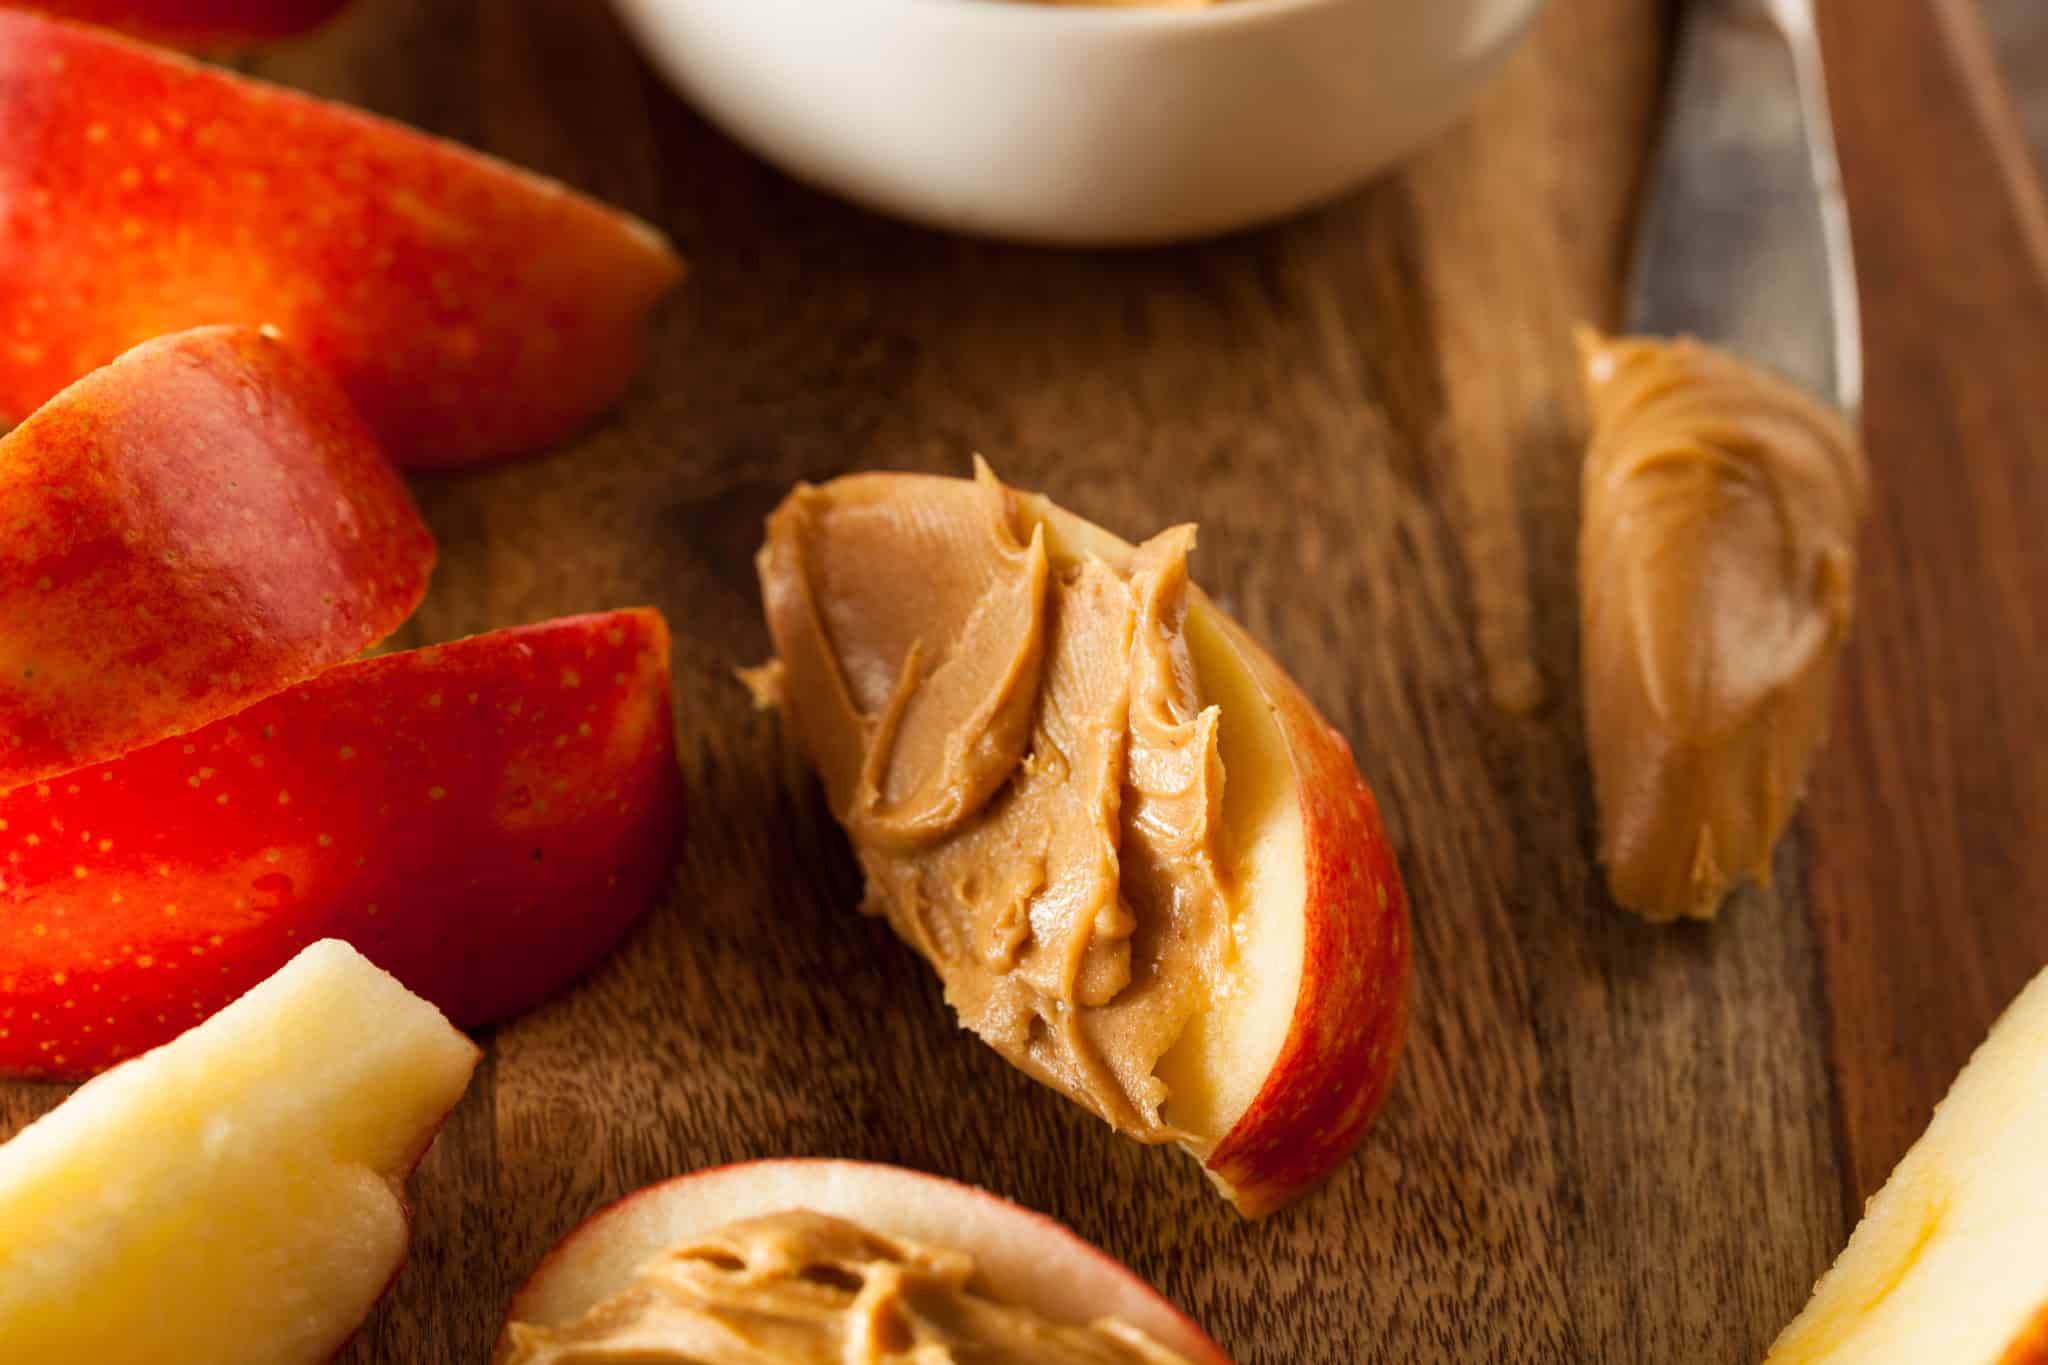 Try these 17 healthy and portable snacks next time you feel the munchies coming on!